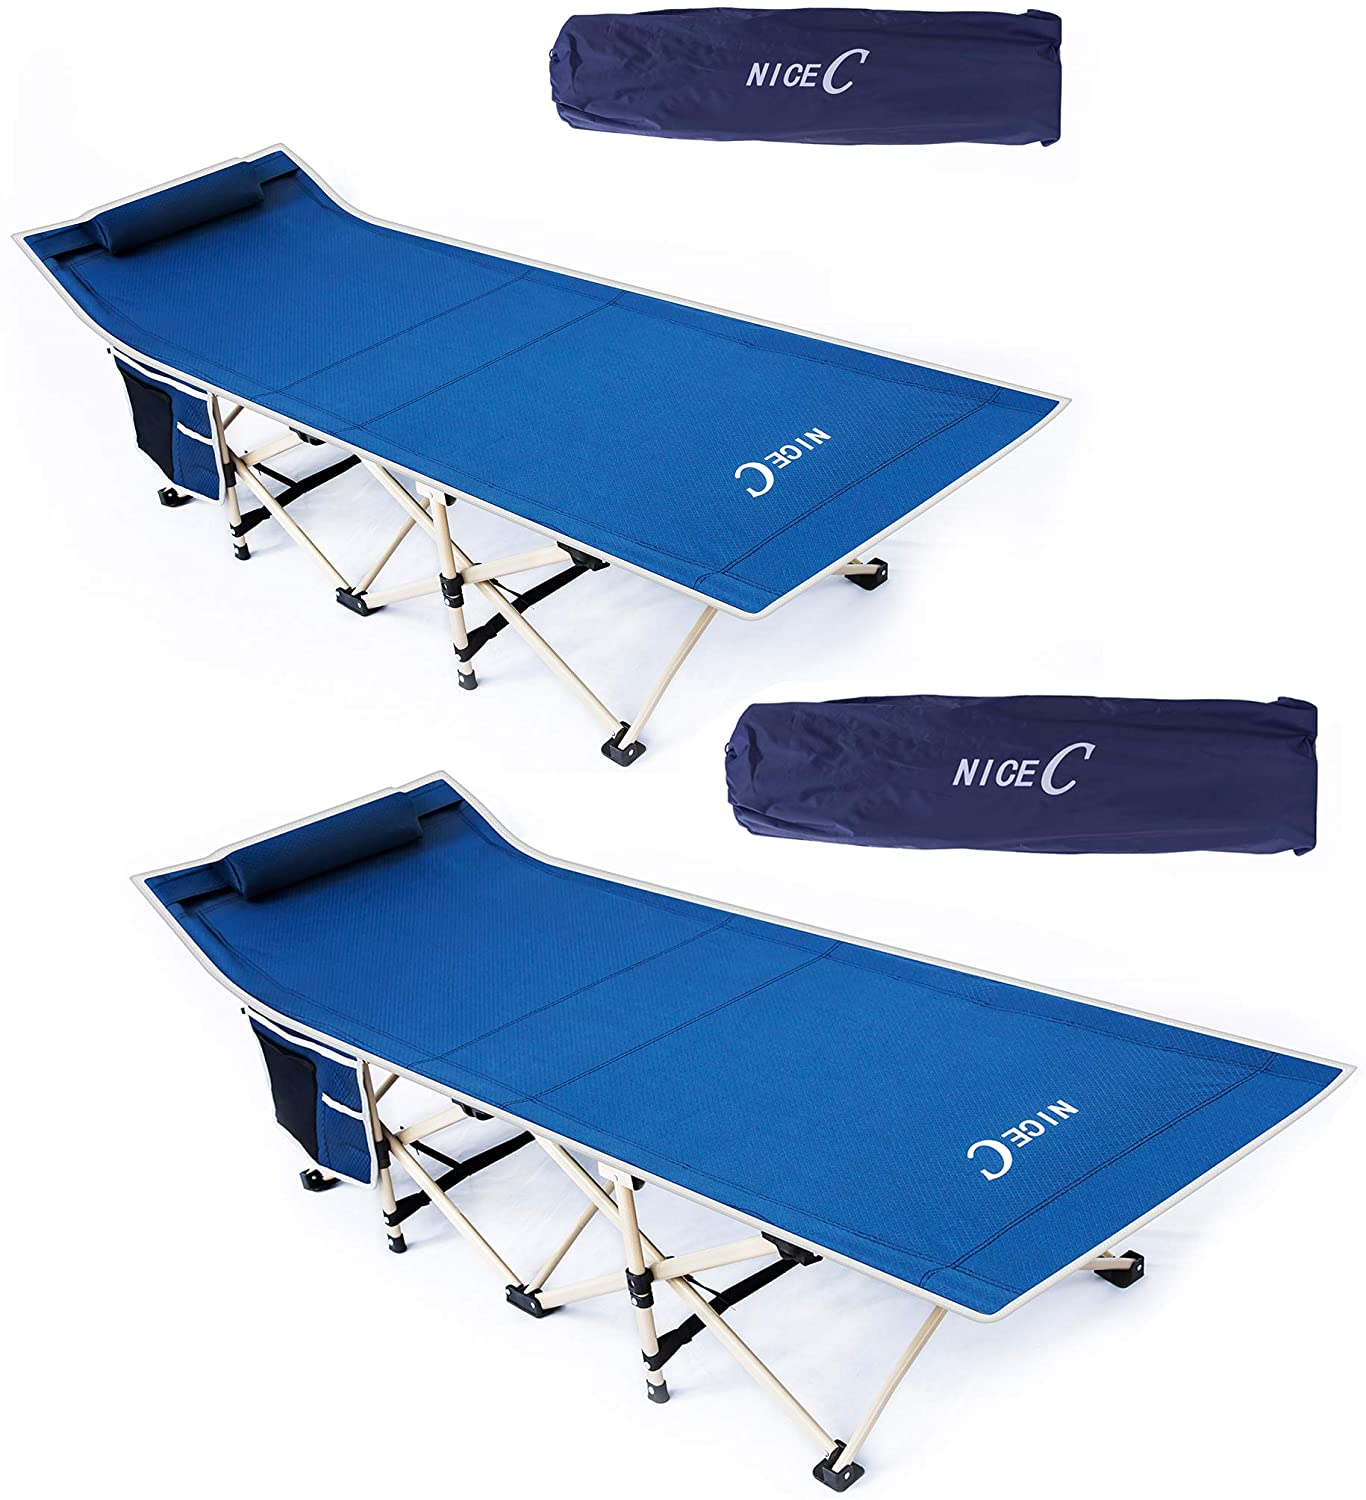 Free shipping anywhere in the nation Nice C Folding Camping Cot Sleeping Year-end annual account Carry Pillow Tent Bed w